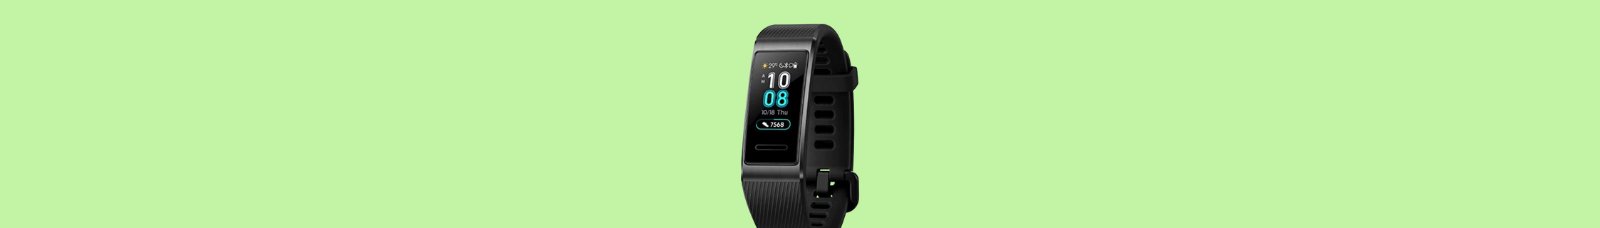 Fitness Trackers, Health & Lifestyle Devices